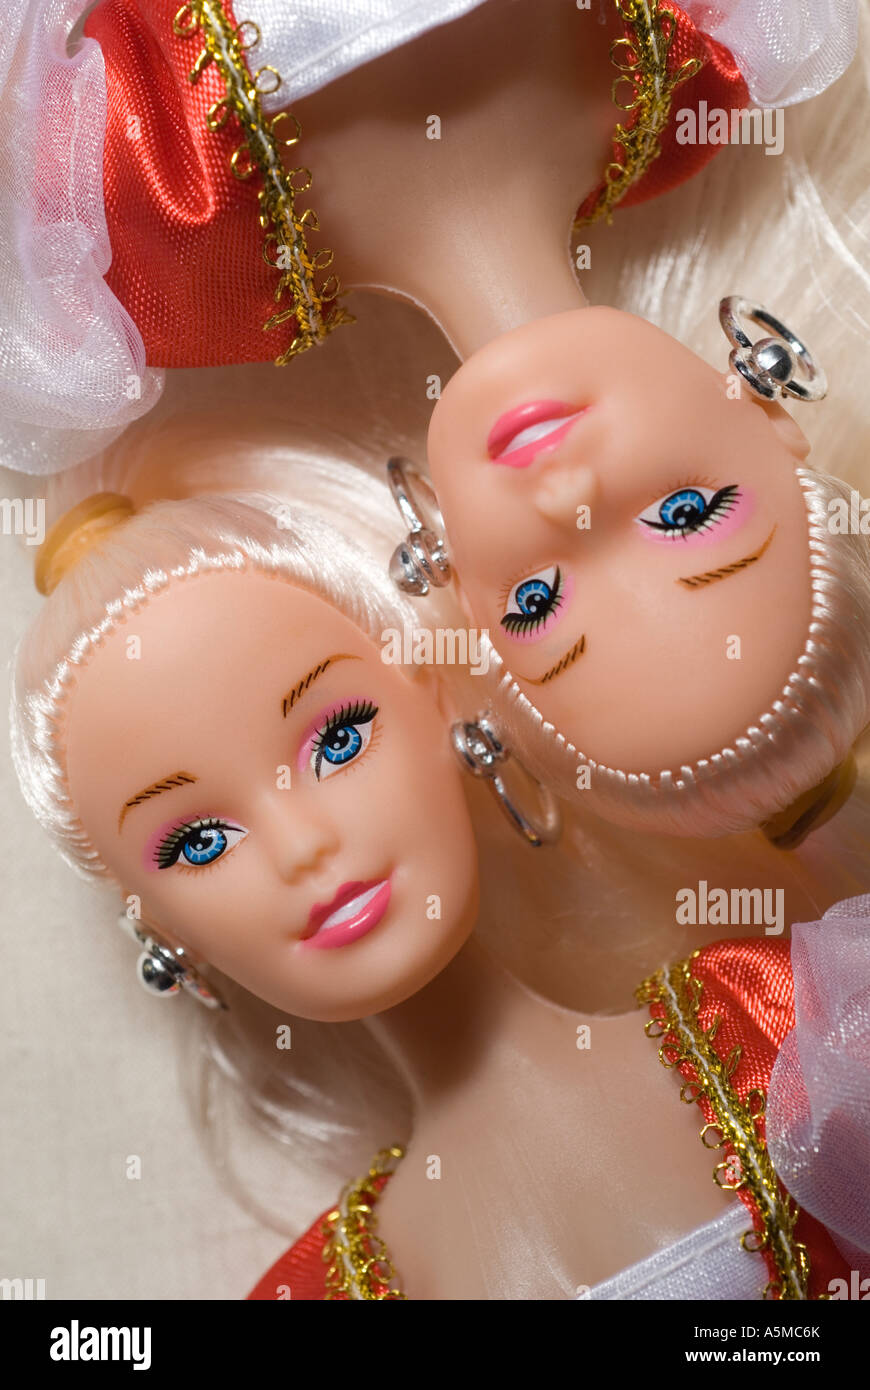 birdseye view of two identical dolls vertical Stock Photo